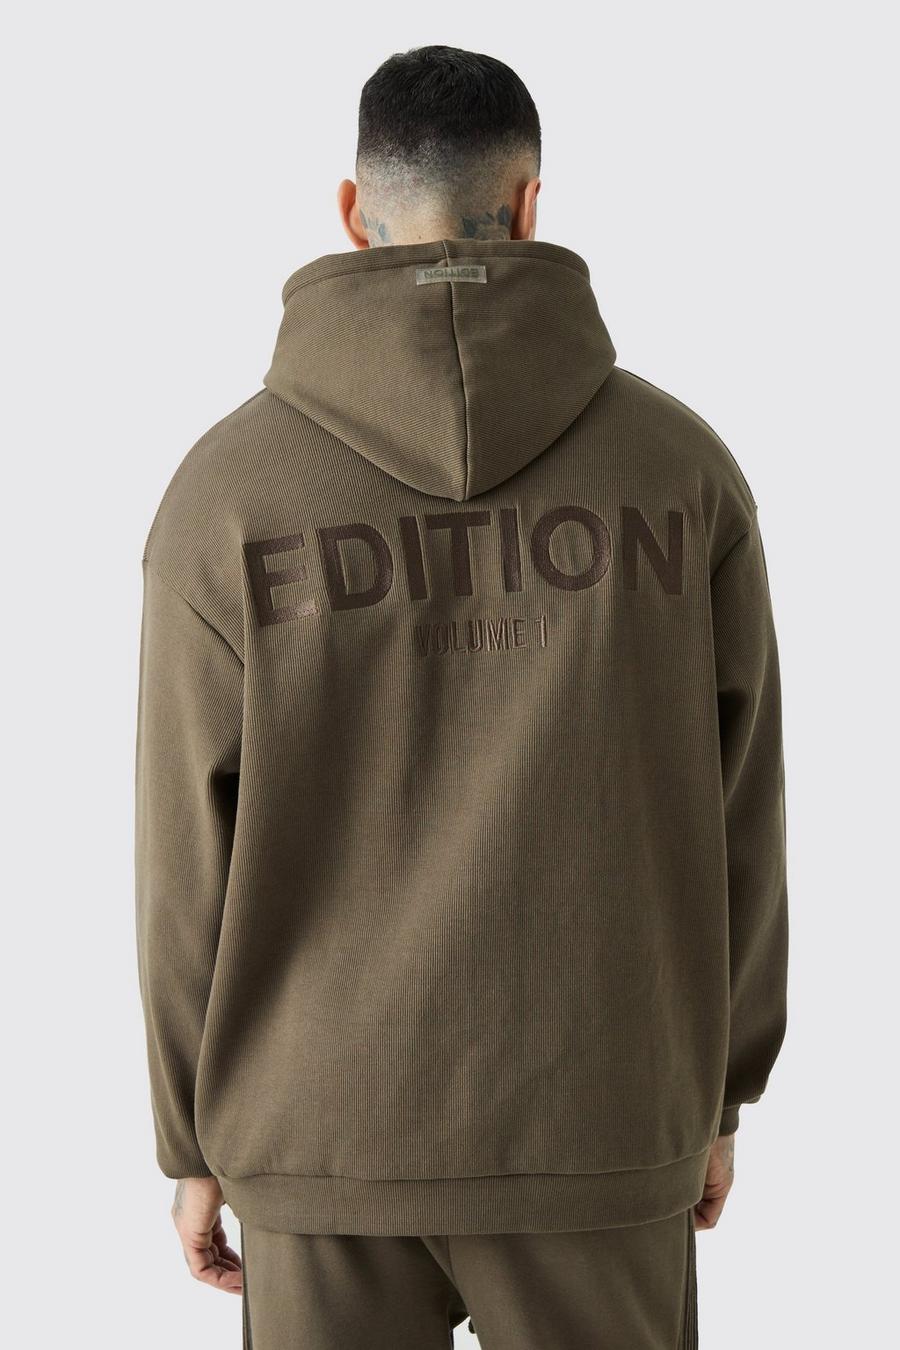 Tall gerippter Oversize Hoodie mit Edition Print, Chocolate